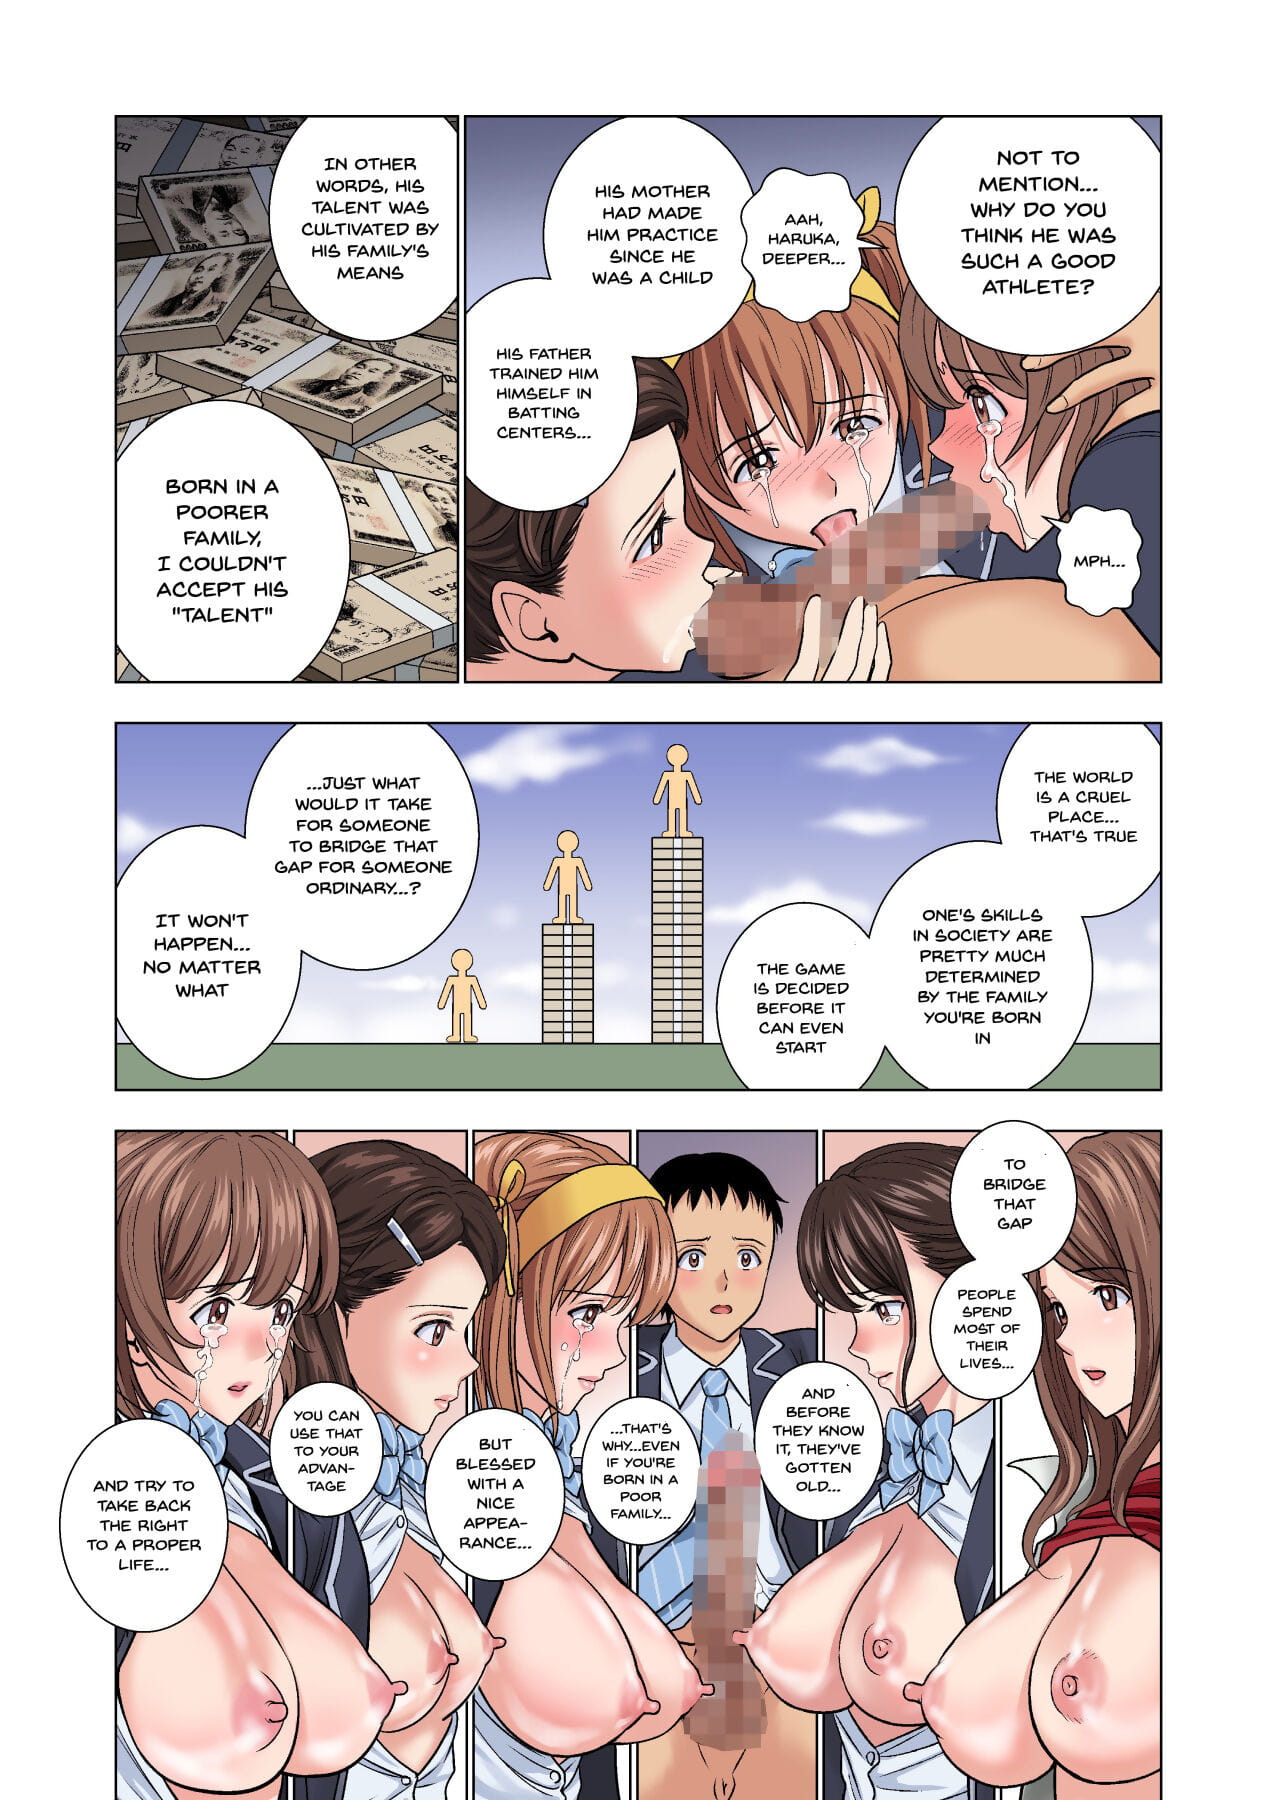 Hiero Meimon Onna Manebu Monogatari - The Story of Being a Manager of This Rich Girls Club English Doujins.com - part 3